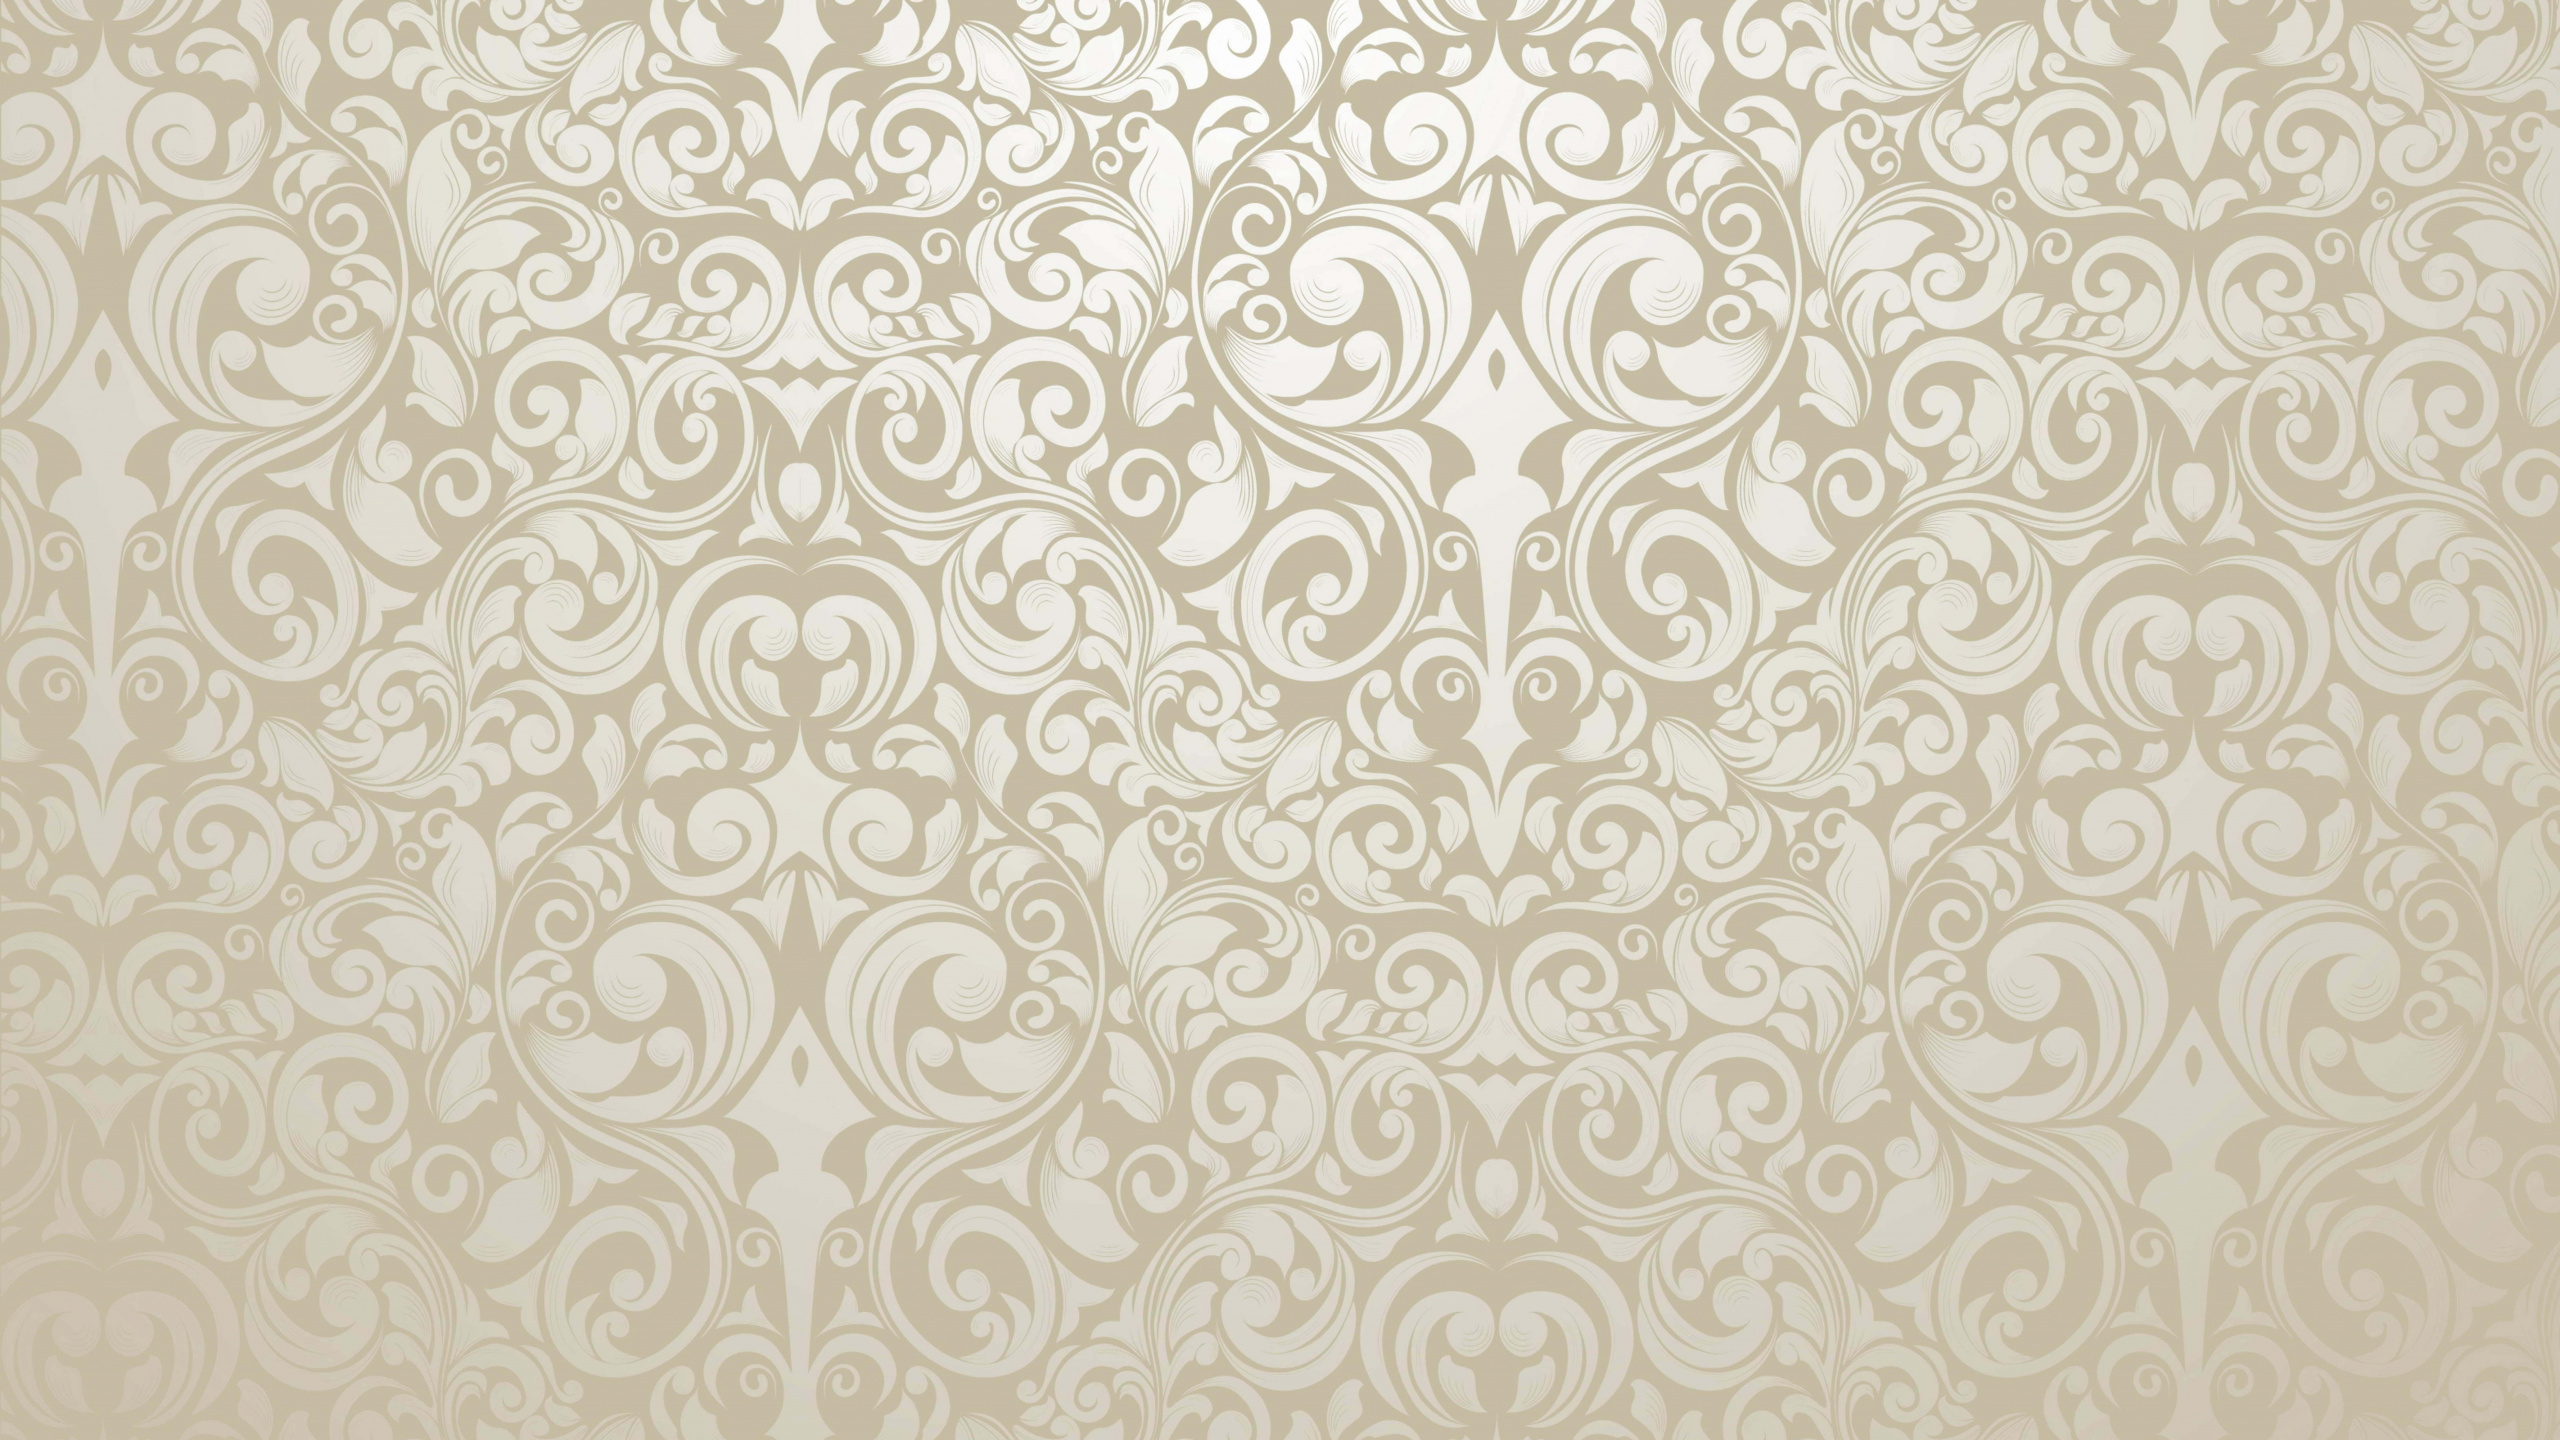 White and Black Floral Textile. Wallpaper in 2560x1440 Resolution